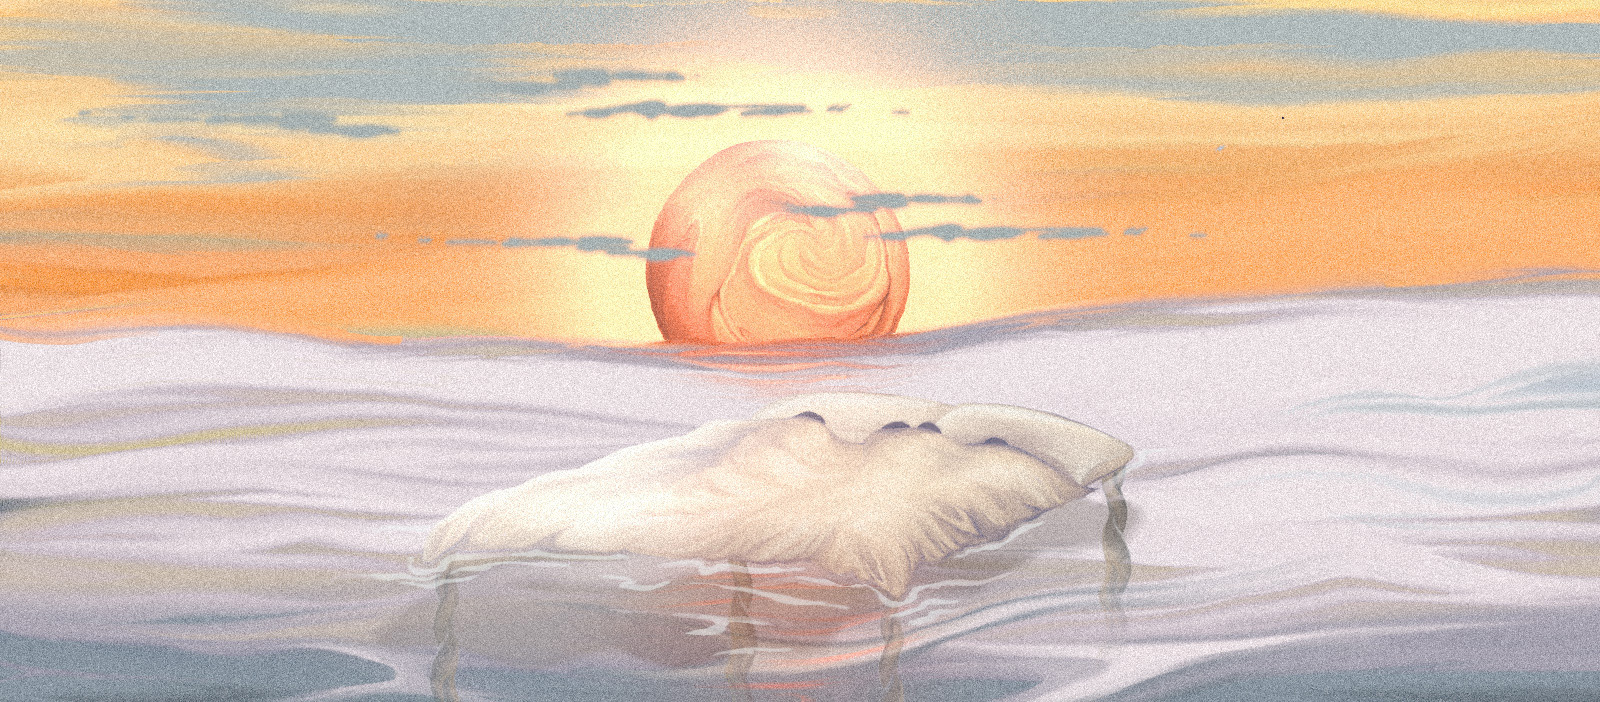 An illustration of a bed floating in the ocean during sunset.